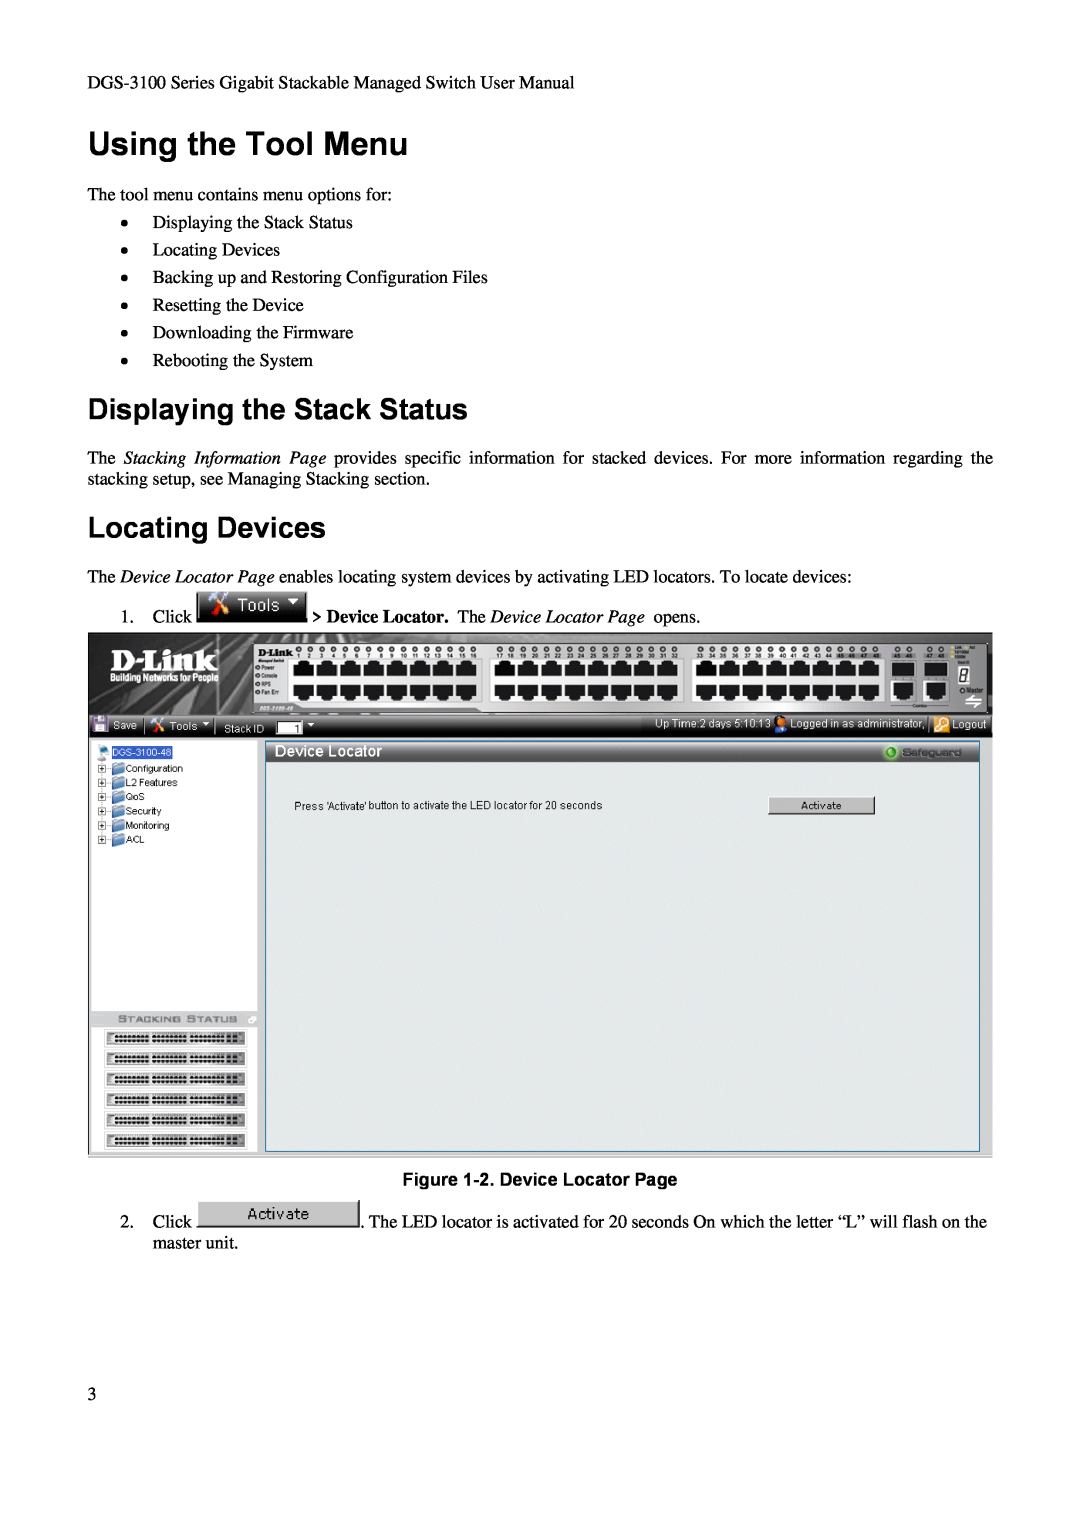 D-Link DGS-3100 user manual Using the Tool Menu, Displaying the Stack Status, Locating Devices, 2. Device Locator Page 